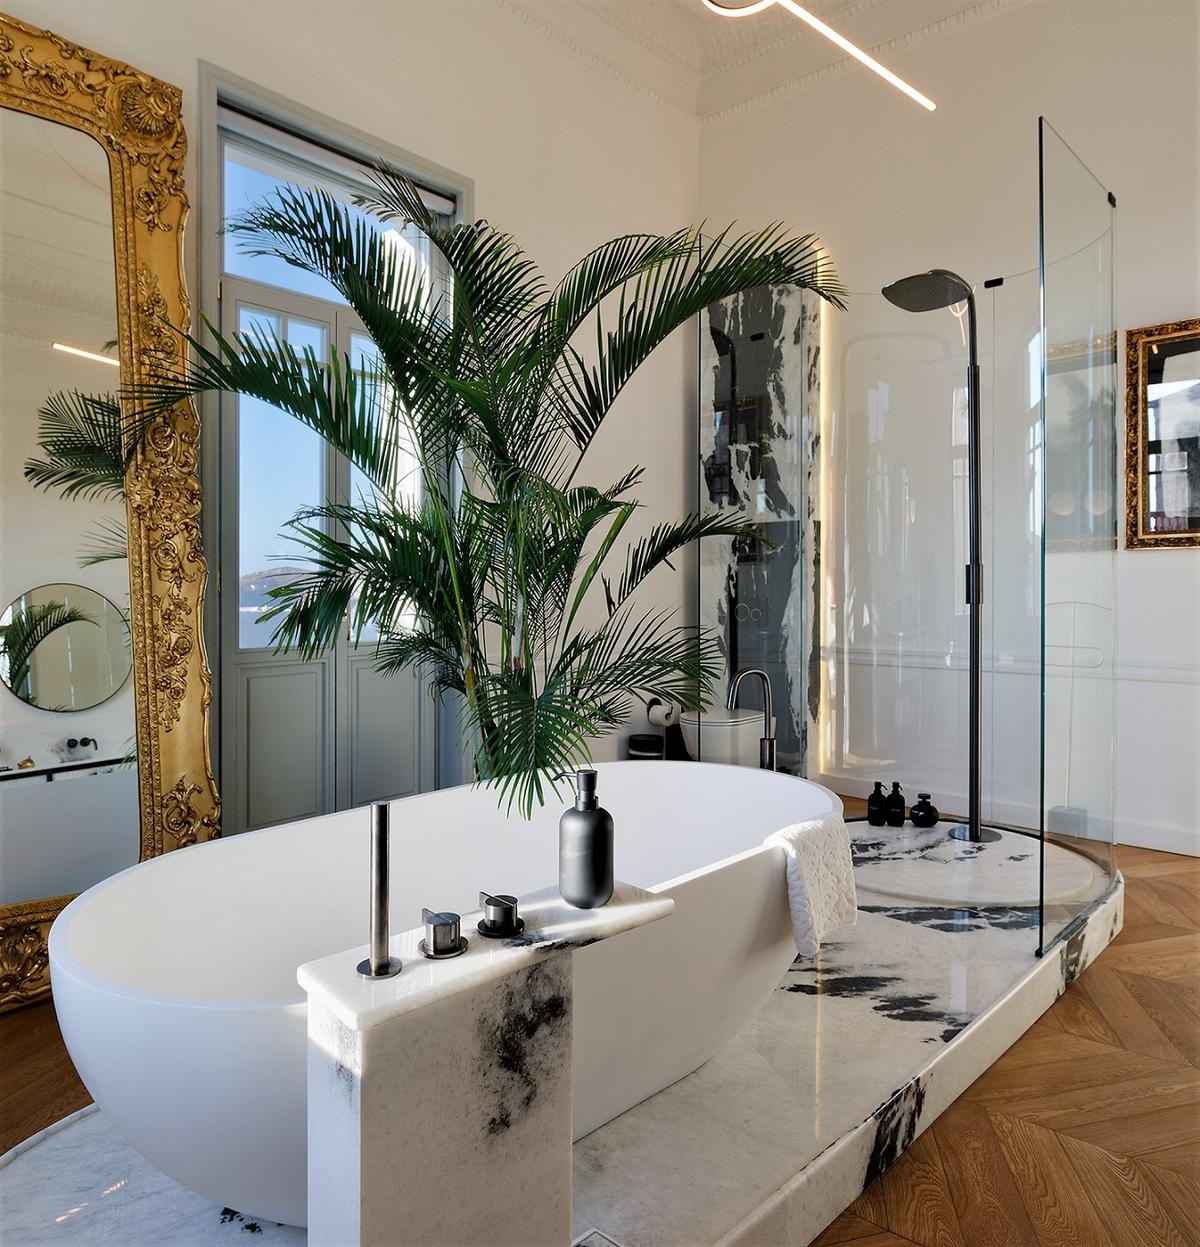 This airy bathroom features herringbone wood flooring, extensive use of gleaming marble, and a relaxing view of the nearby waters. (Courtesy of Greece Sotheby’s International Realty)